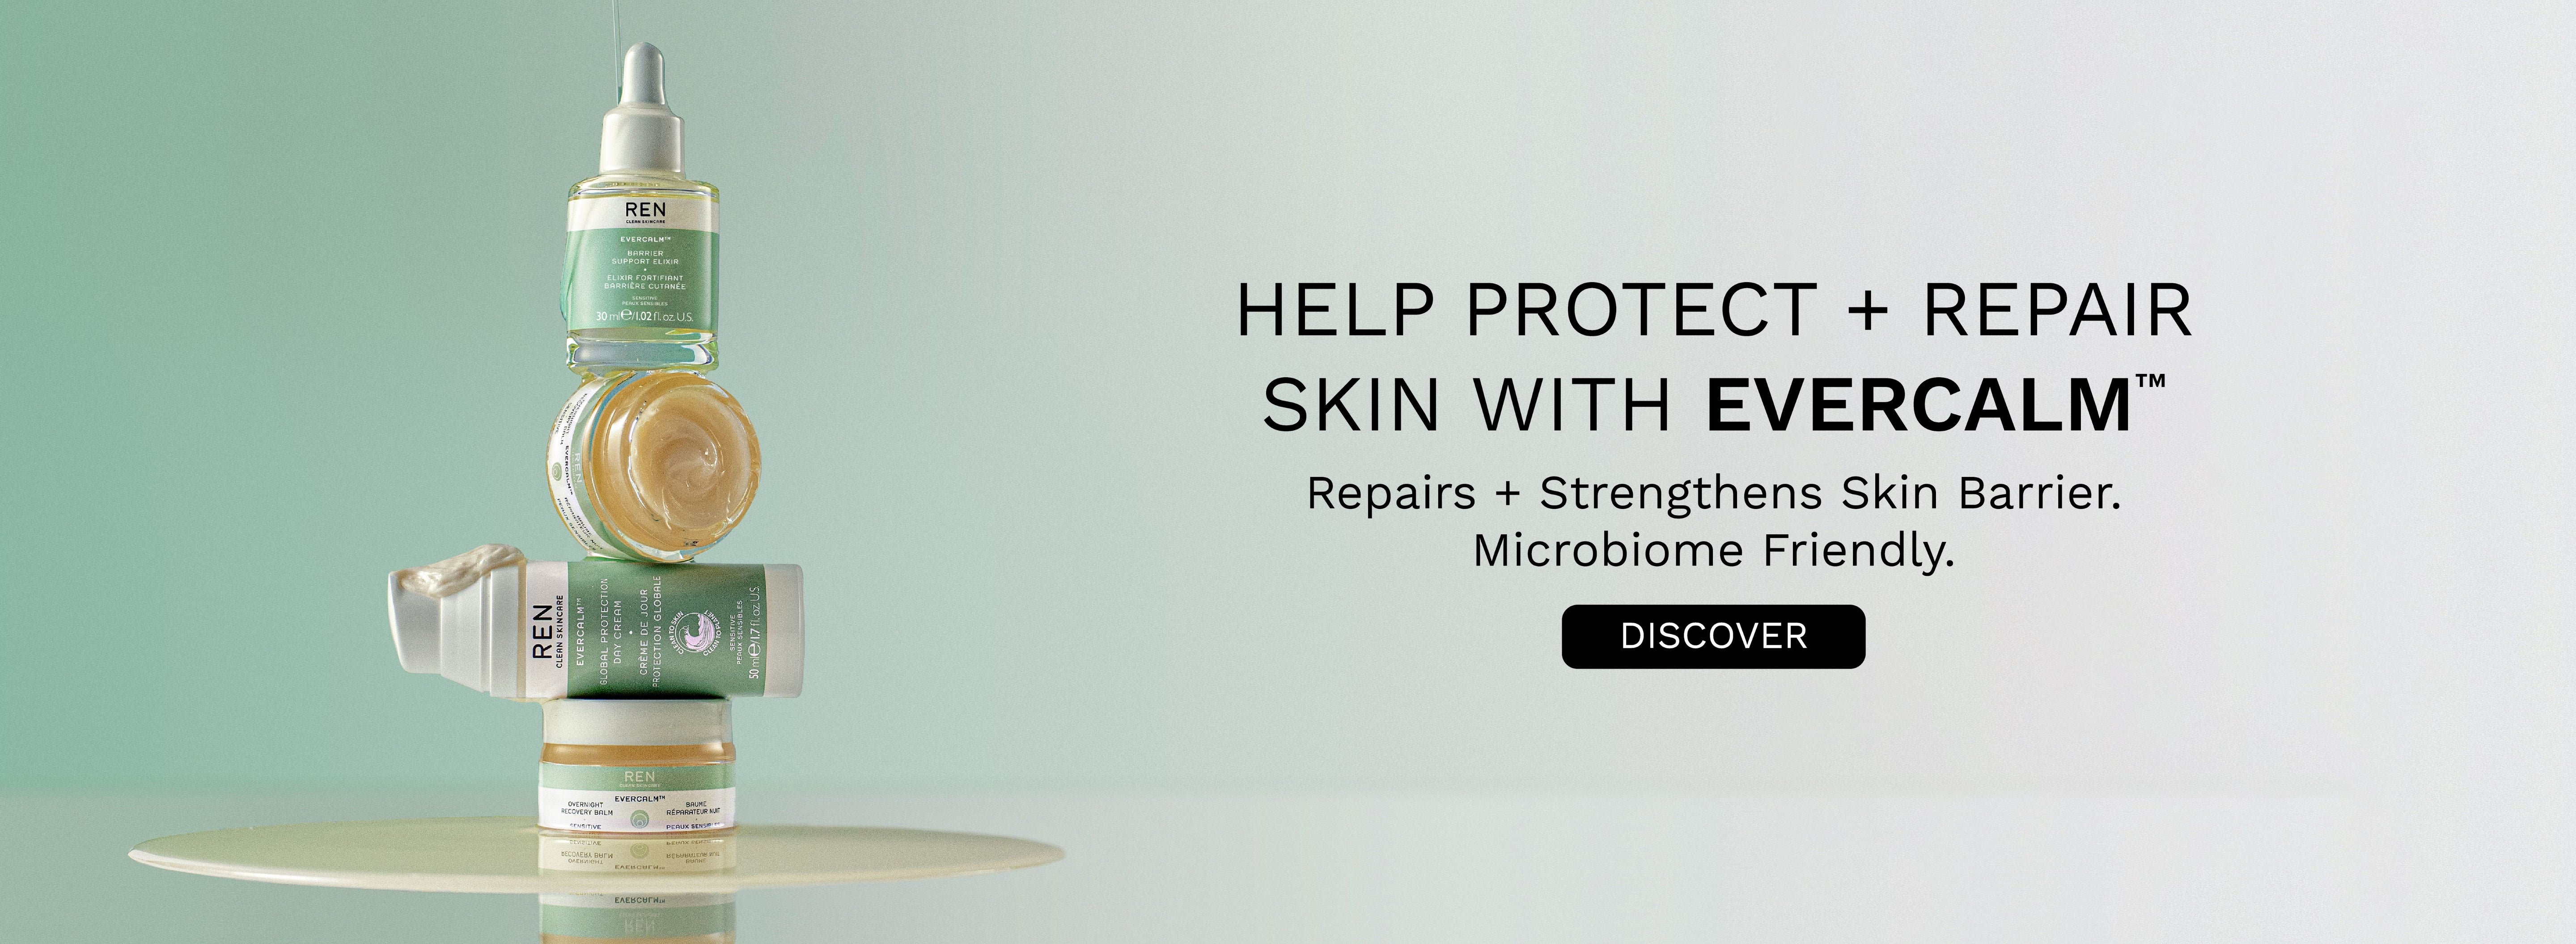 Help protect + repair with Evercalm. Repairs + strengthens skin barrier. Microbiome friendly.